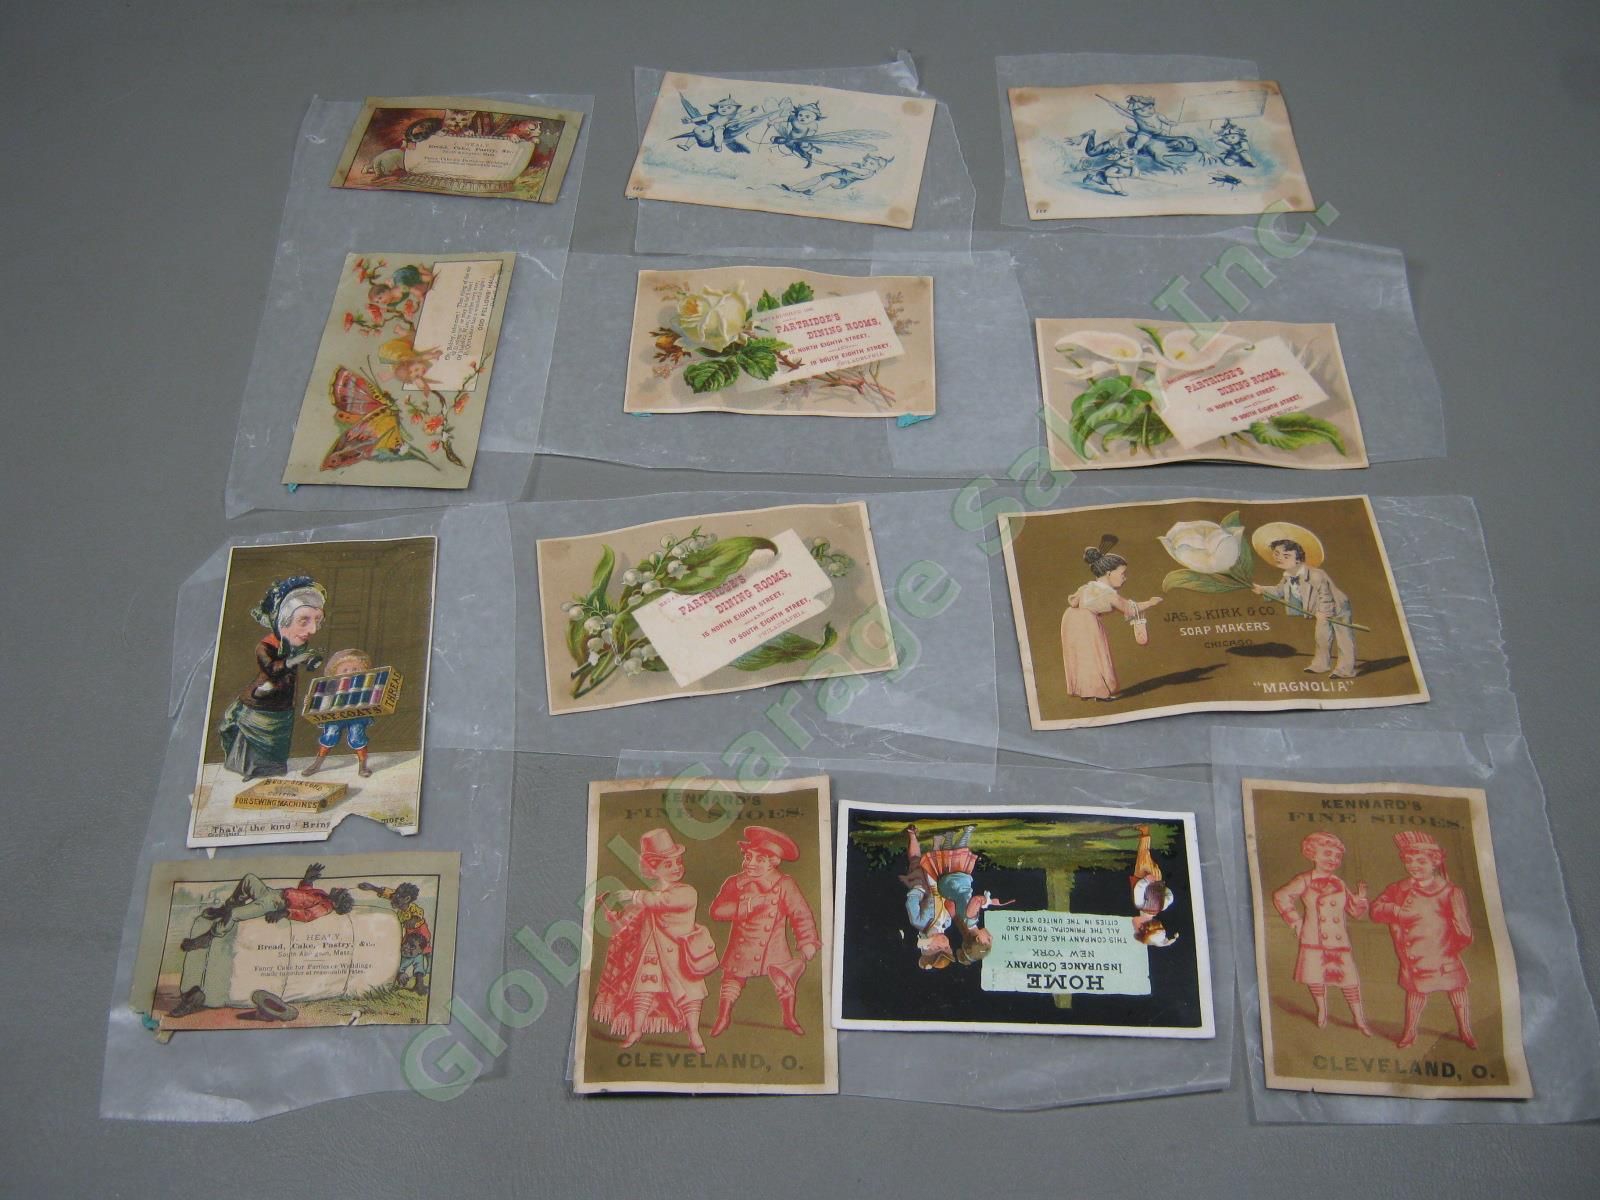 Huge Lot Assorted Vintage Antique Victorian Advertising Trade Cards Collection + 4